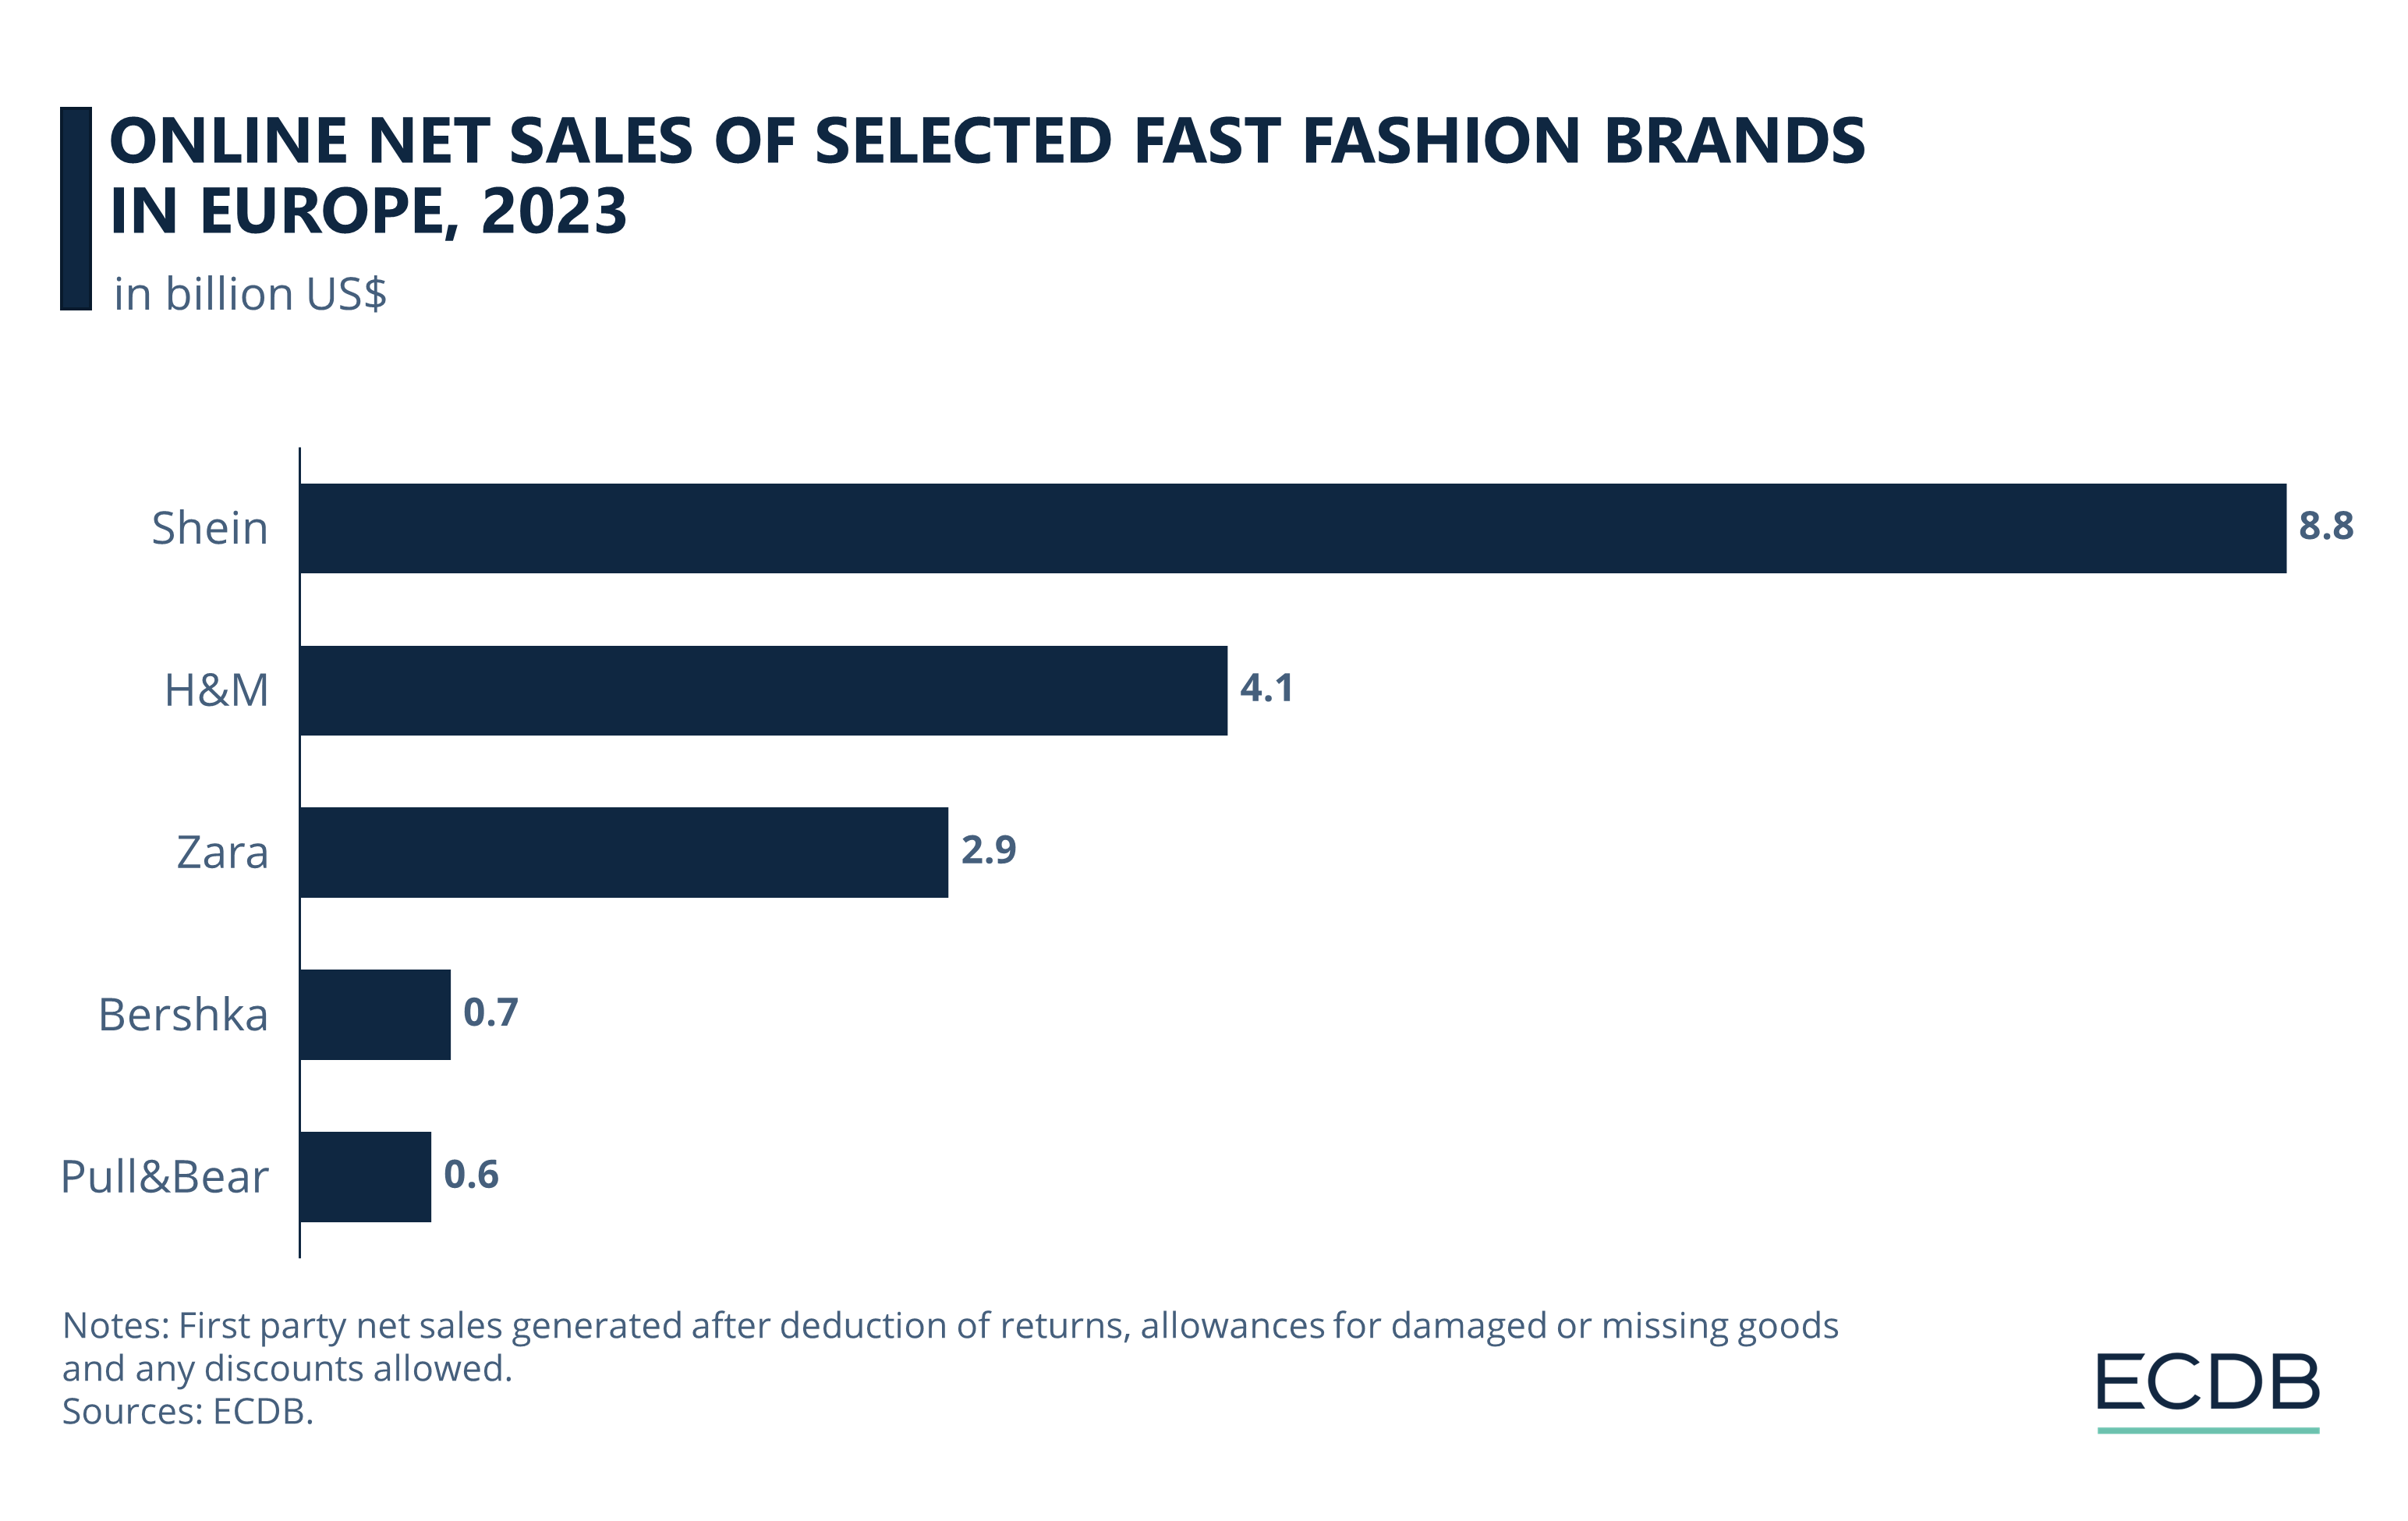 Online Net Sales of Selected Fast Fashion Brands in Europe, 2023